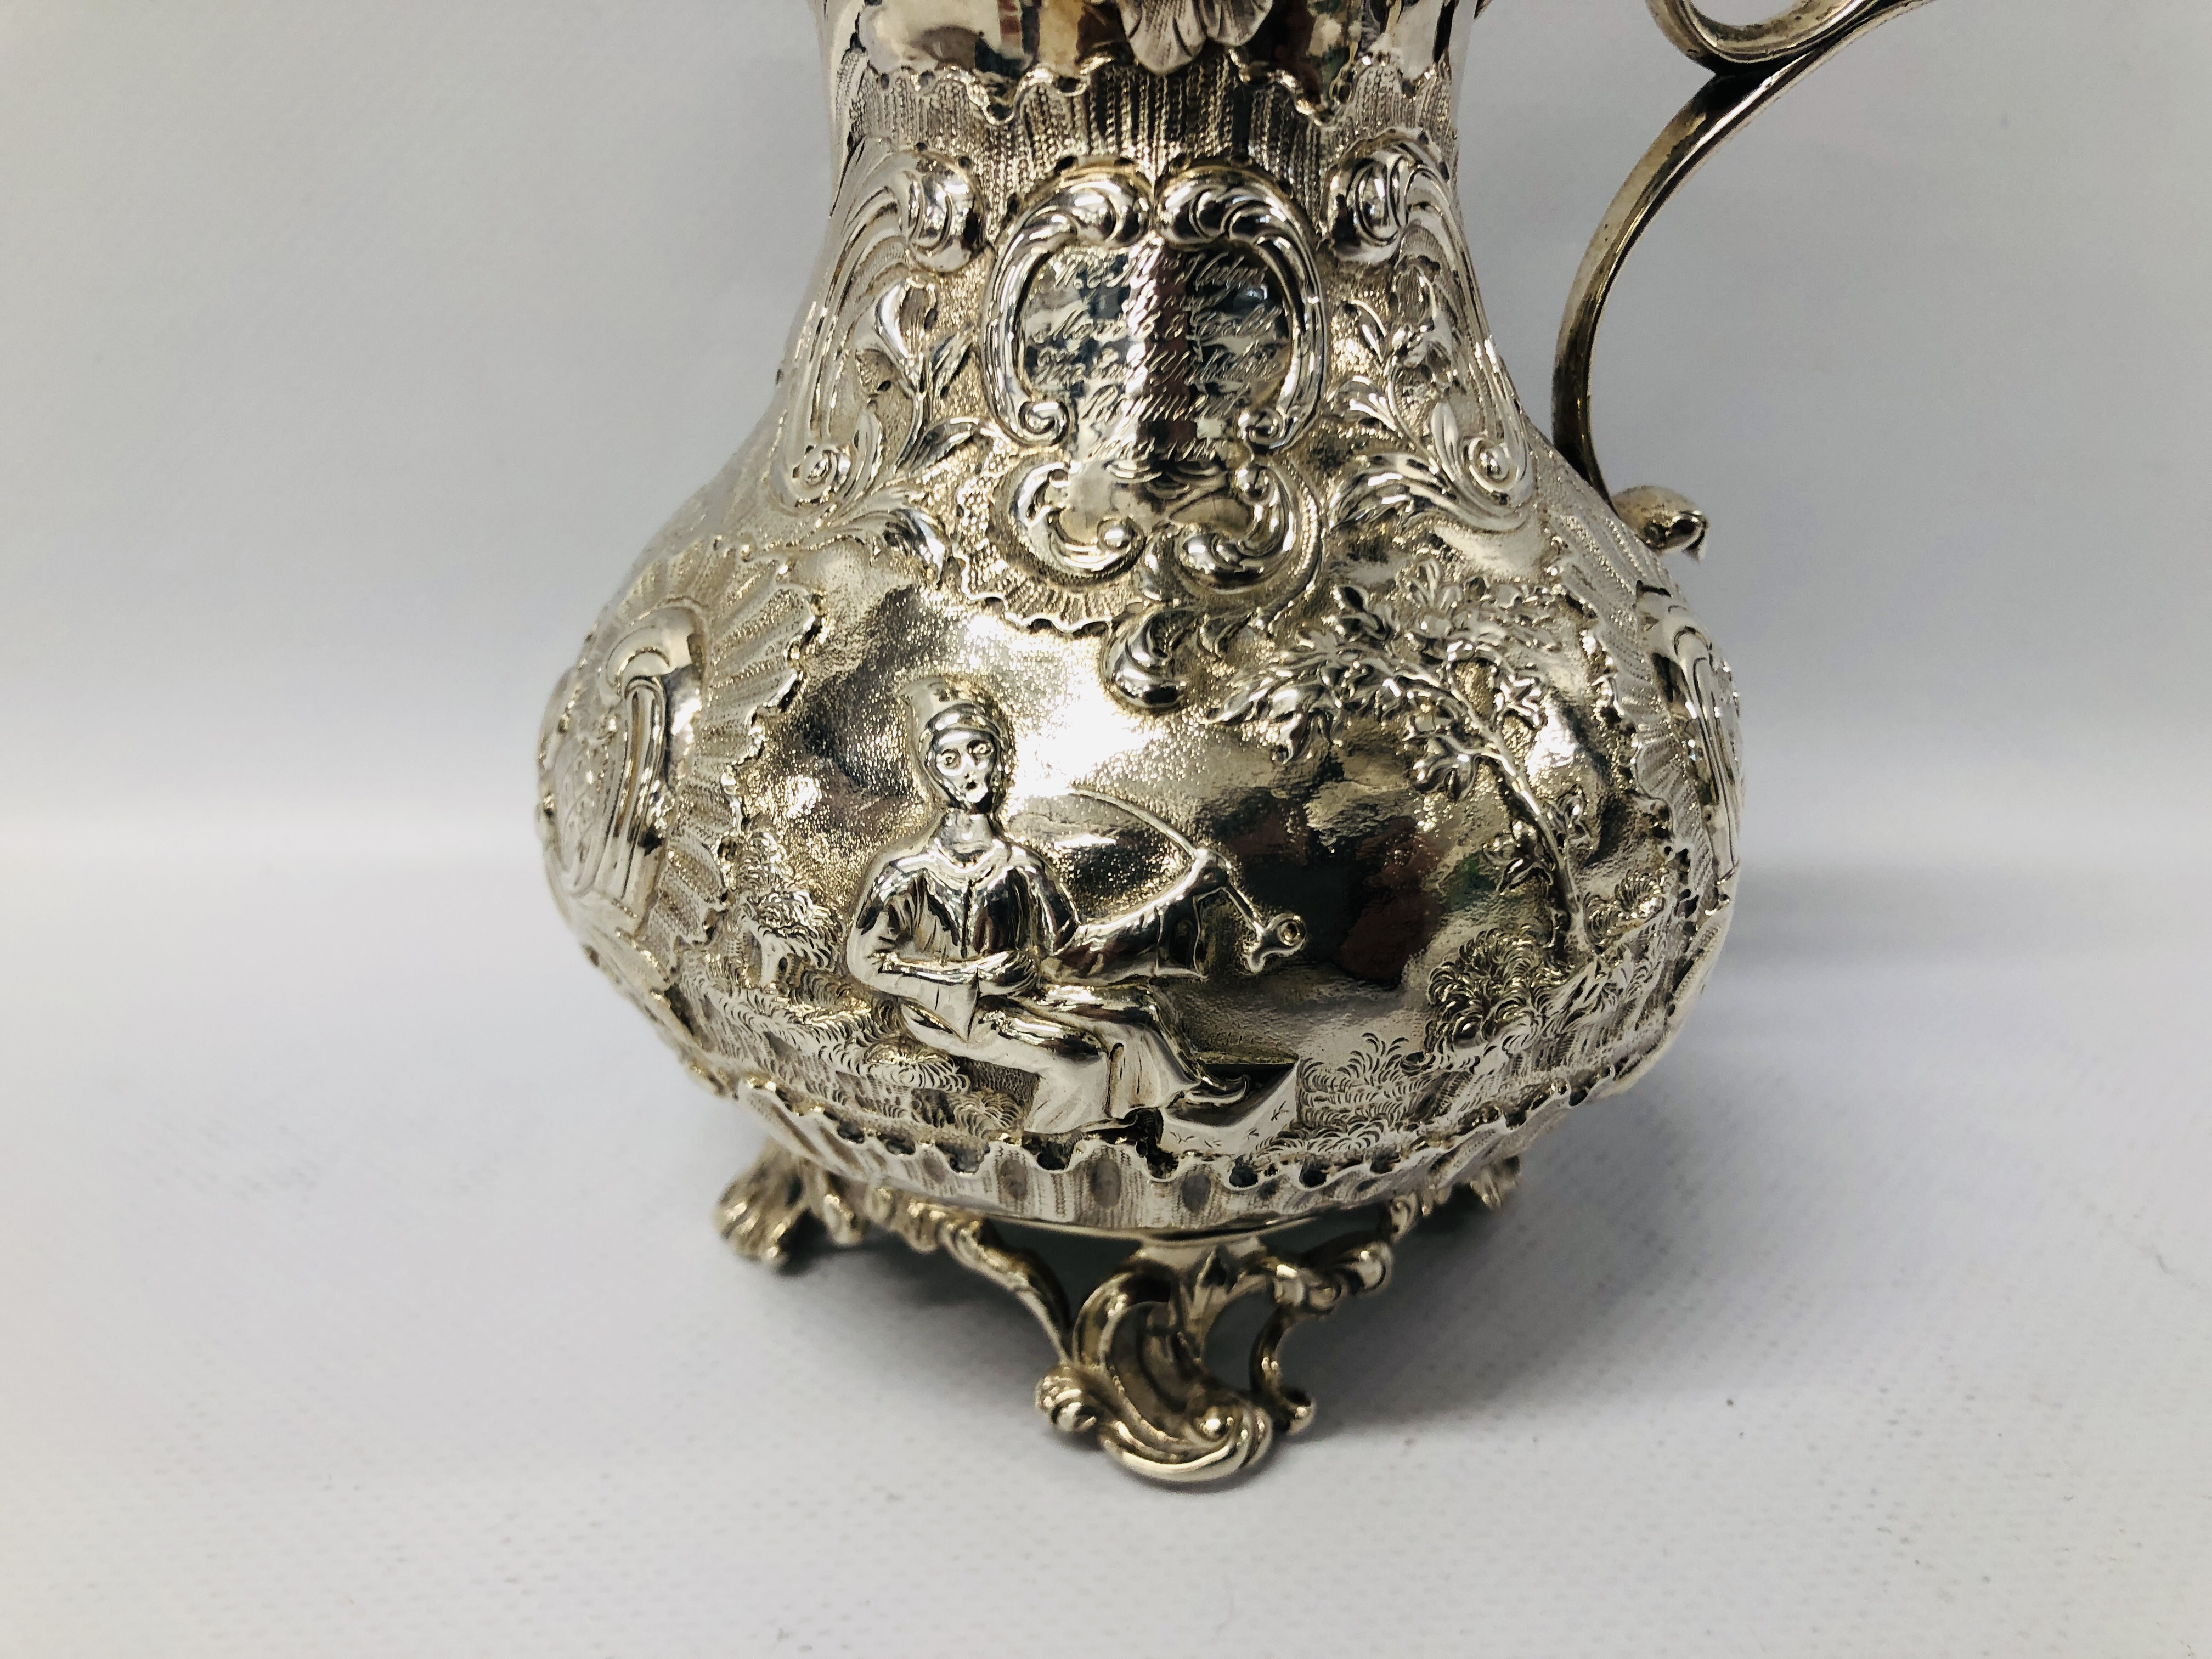 A SILVER MILK JUG OF ROCOCO DESIGN DECORATED WITH CHINOISERIE FIGURES WITH INSCRIPTION MR AND MRS J. - Image 5 of 25